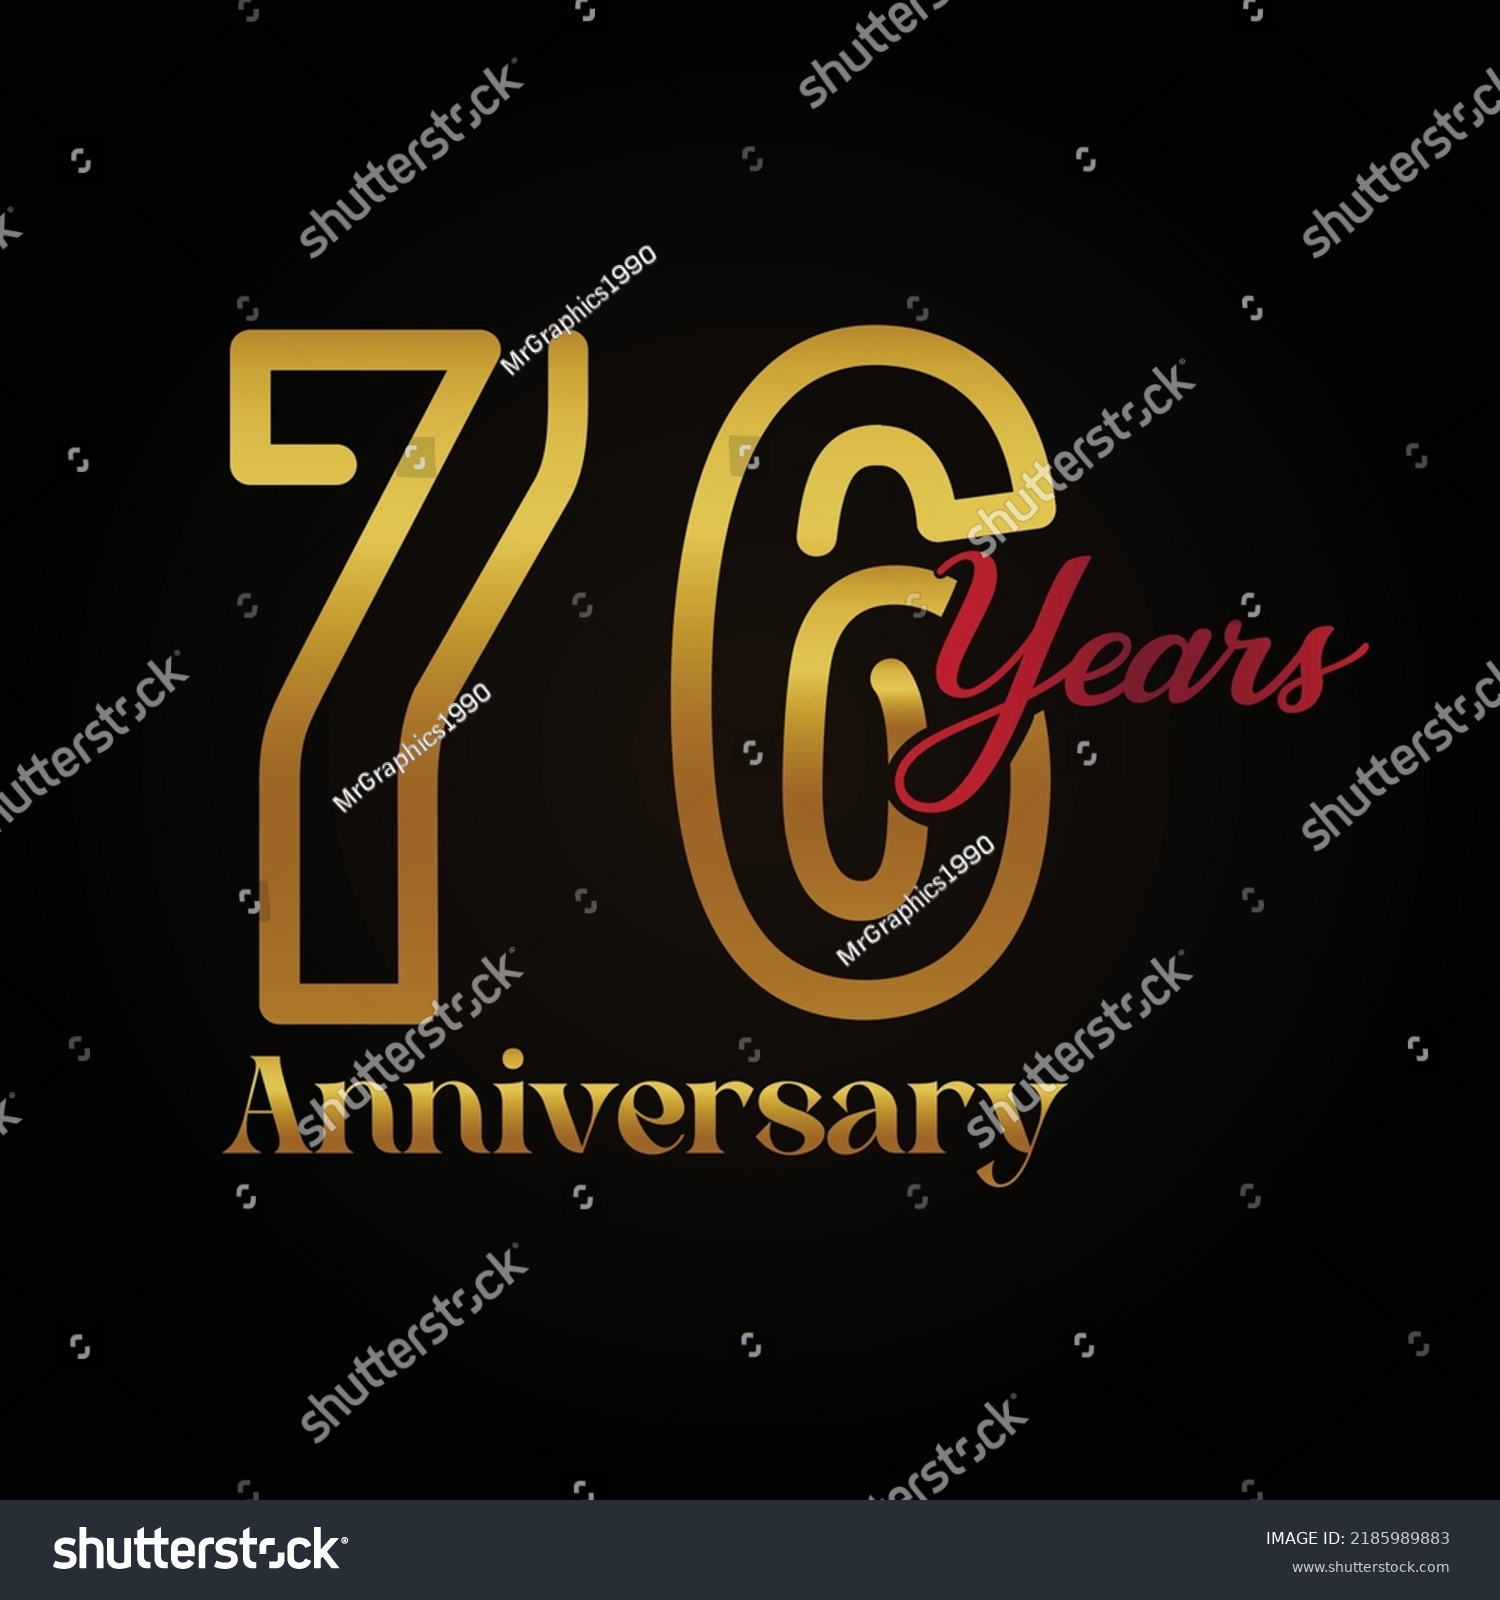 76th Anniversary Celebration Logotype With Royalty Free Stock Vector 2185989883 7244